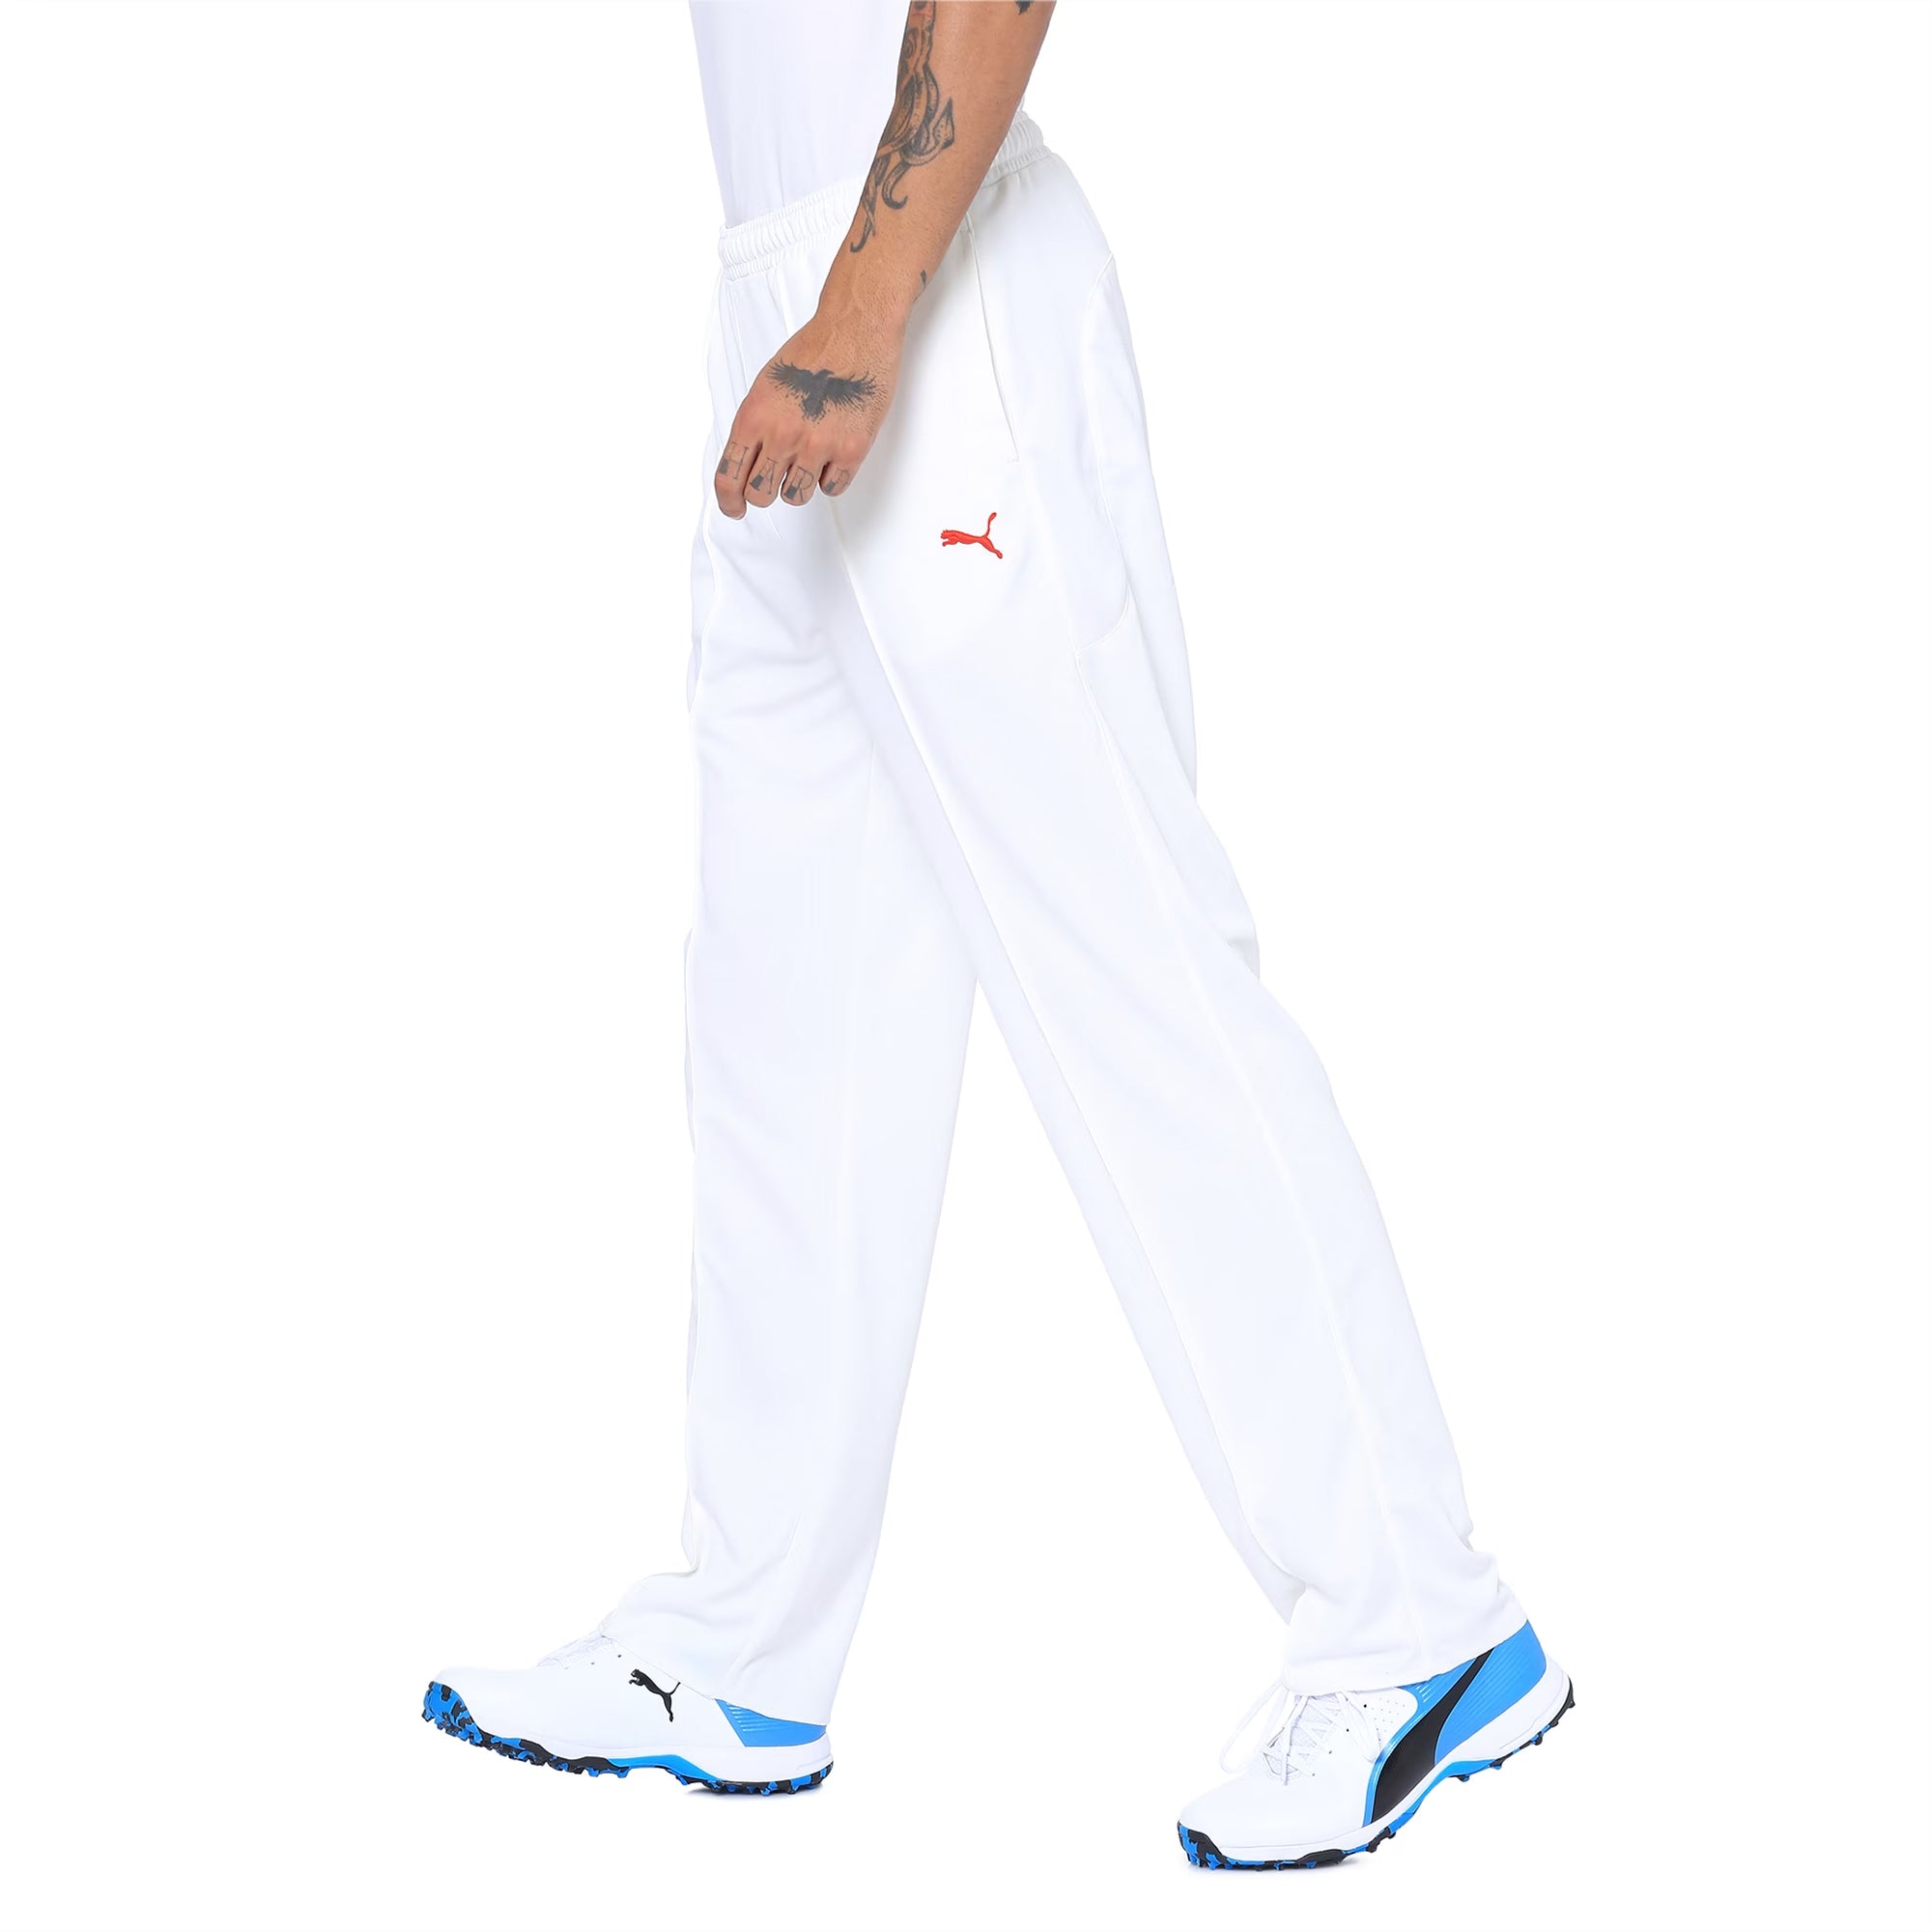 PUMA Iconic Mcs Mesh Men Track Pants 530193_01 in Hyderabad at best price  by Puma Sports India Pvt Ltd - Justdial